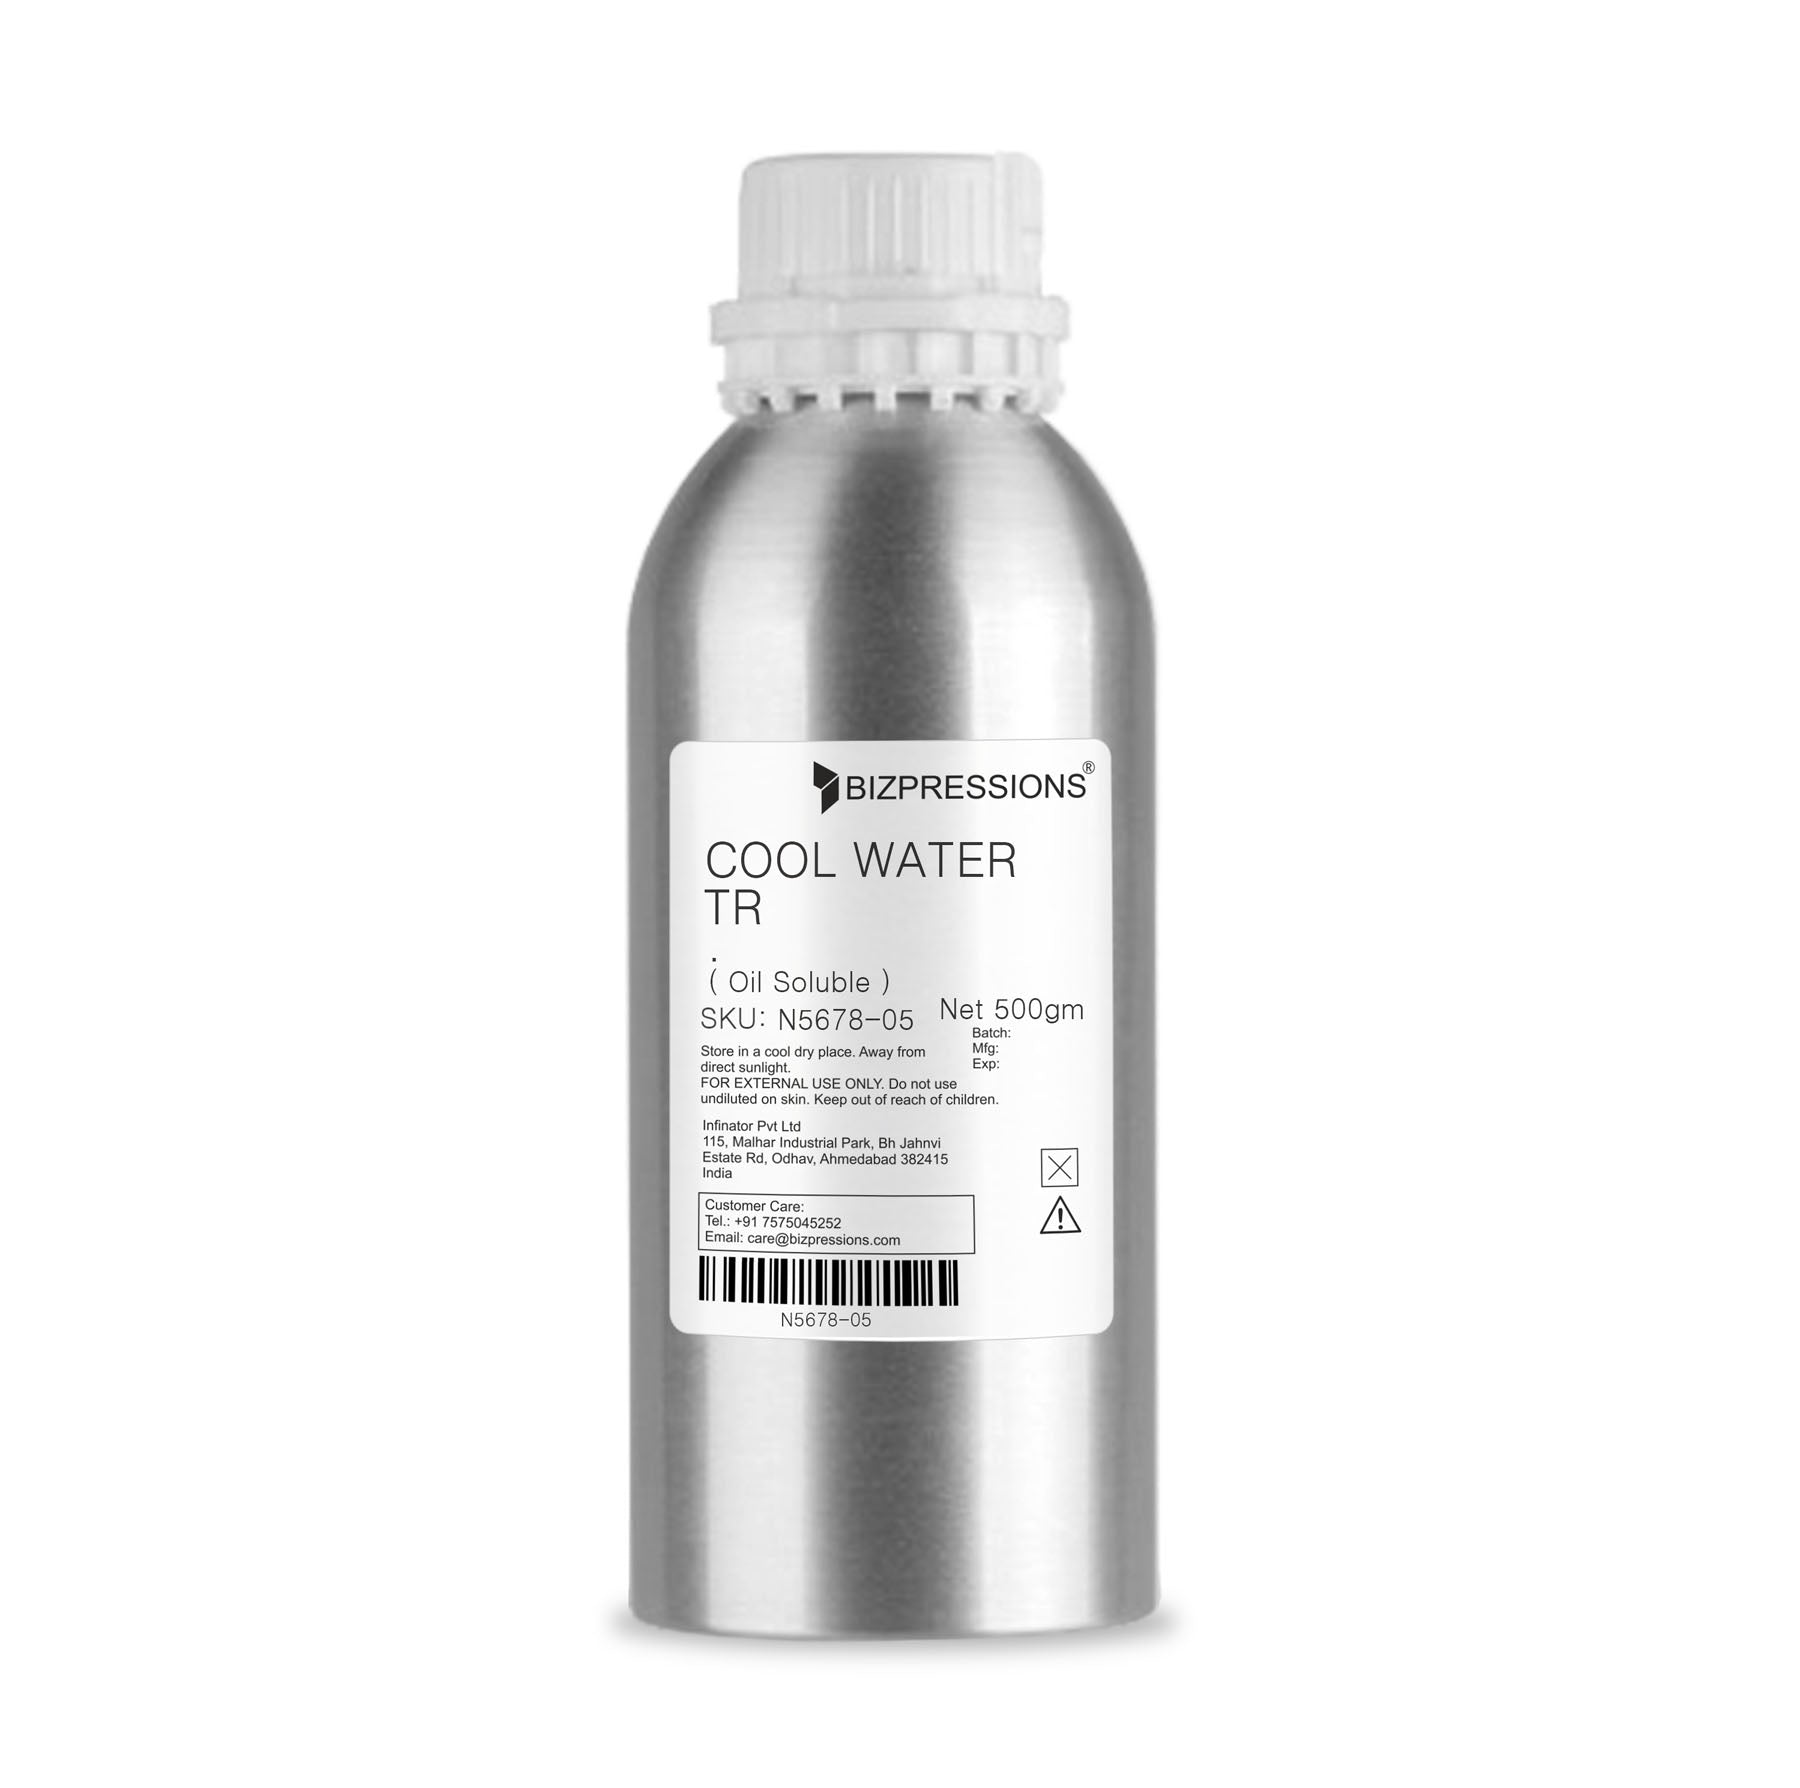 COOL WATER TR - Fragrance ( Oil Soluble ) - 500 gm